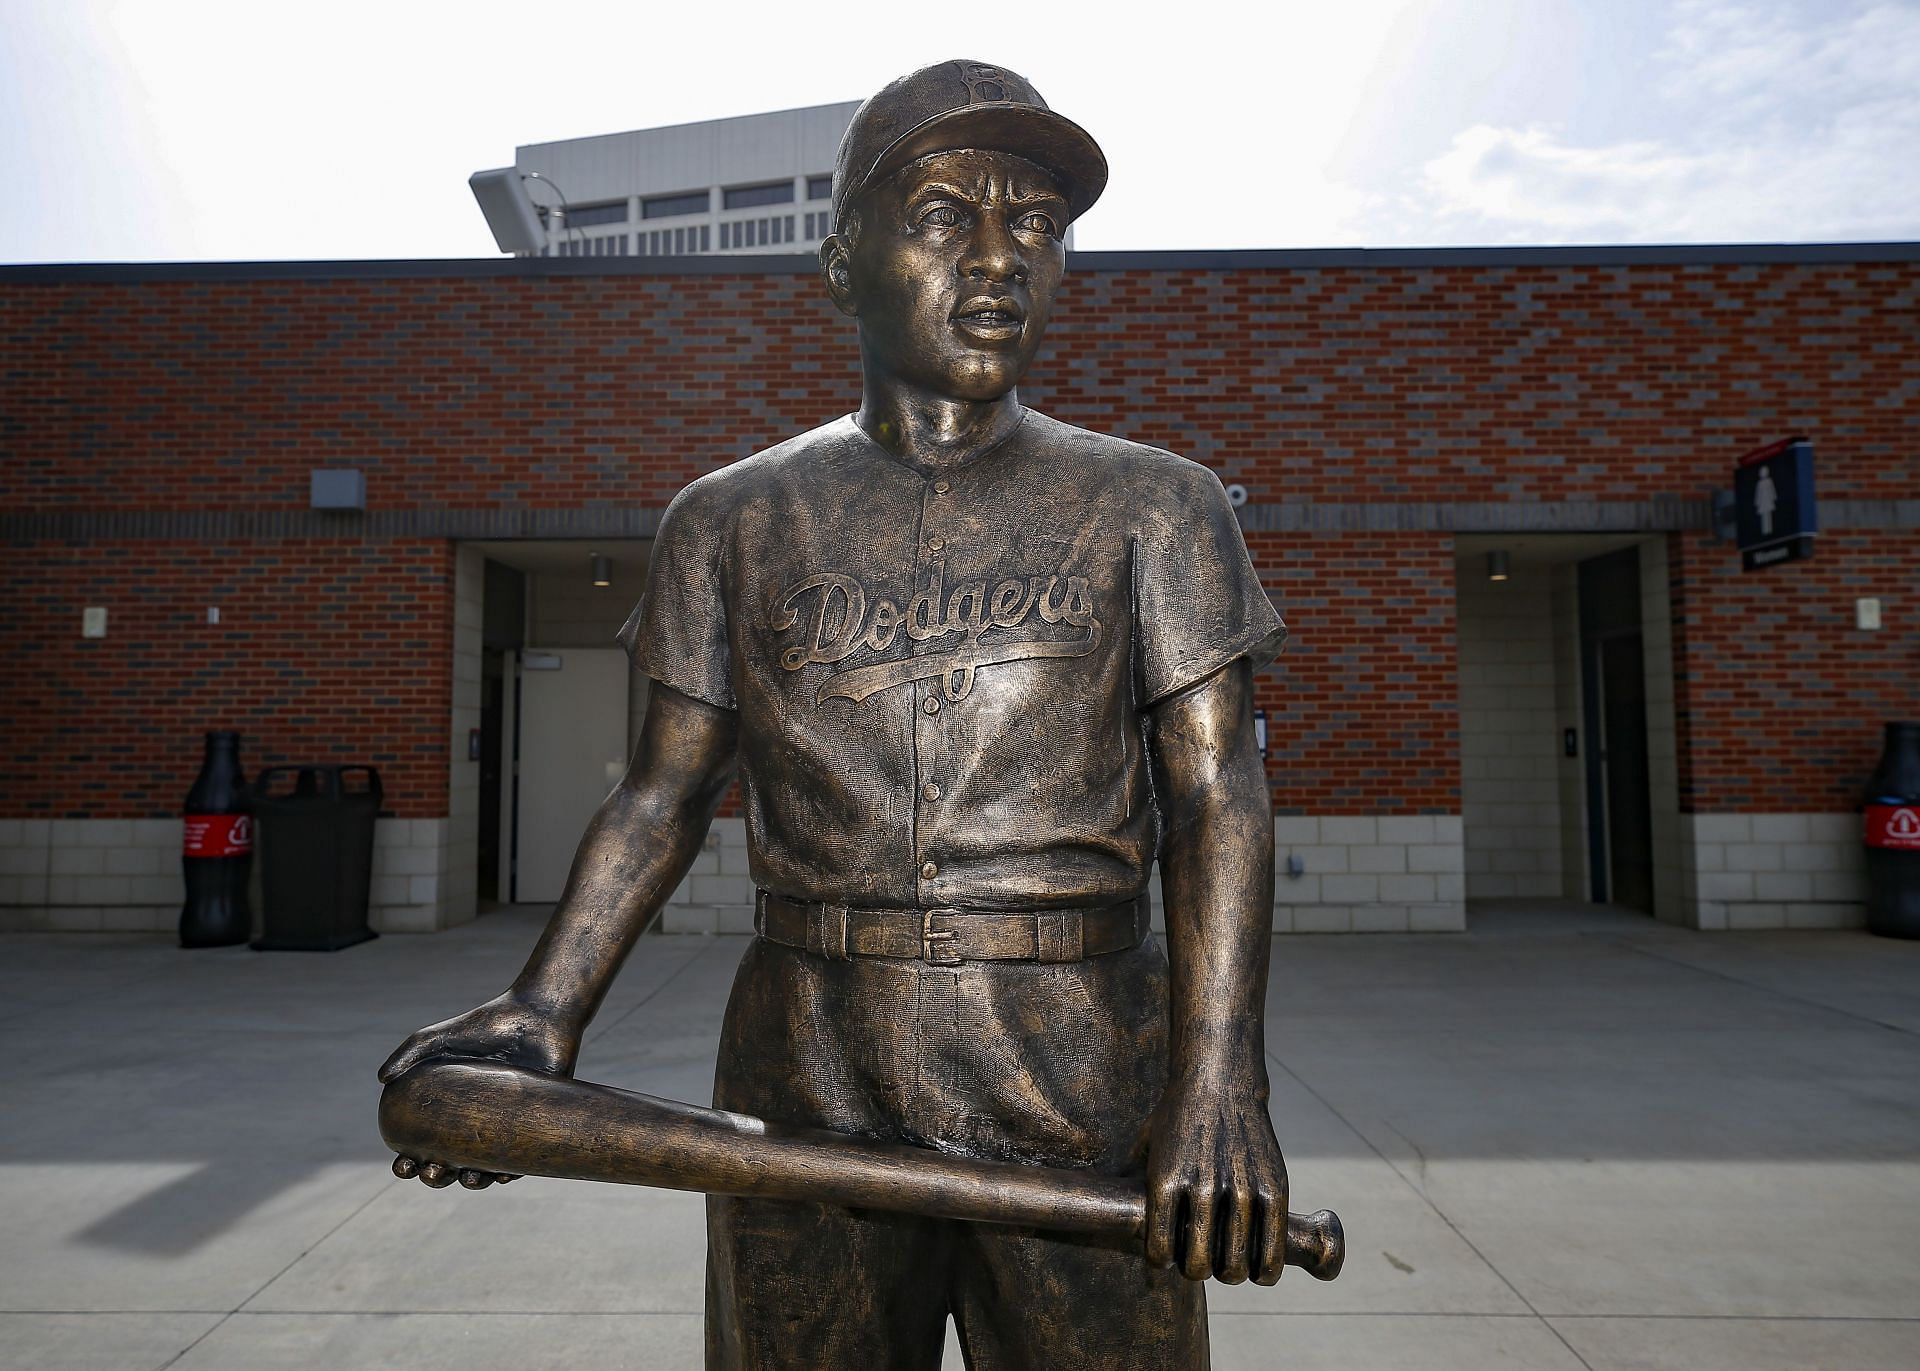 Jackie Robinson is honored league-wide